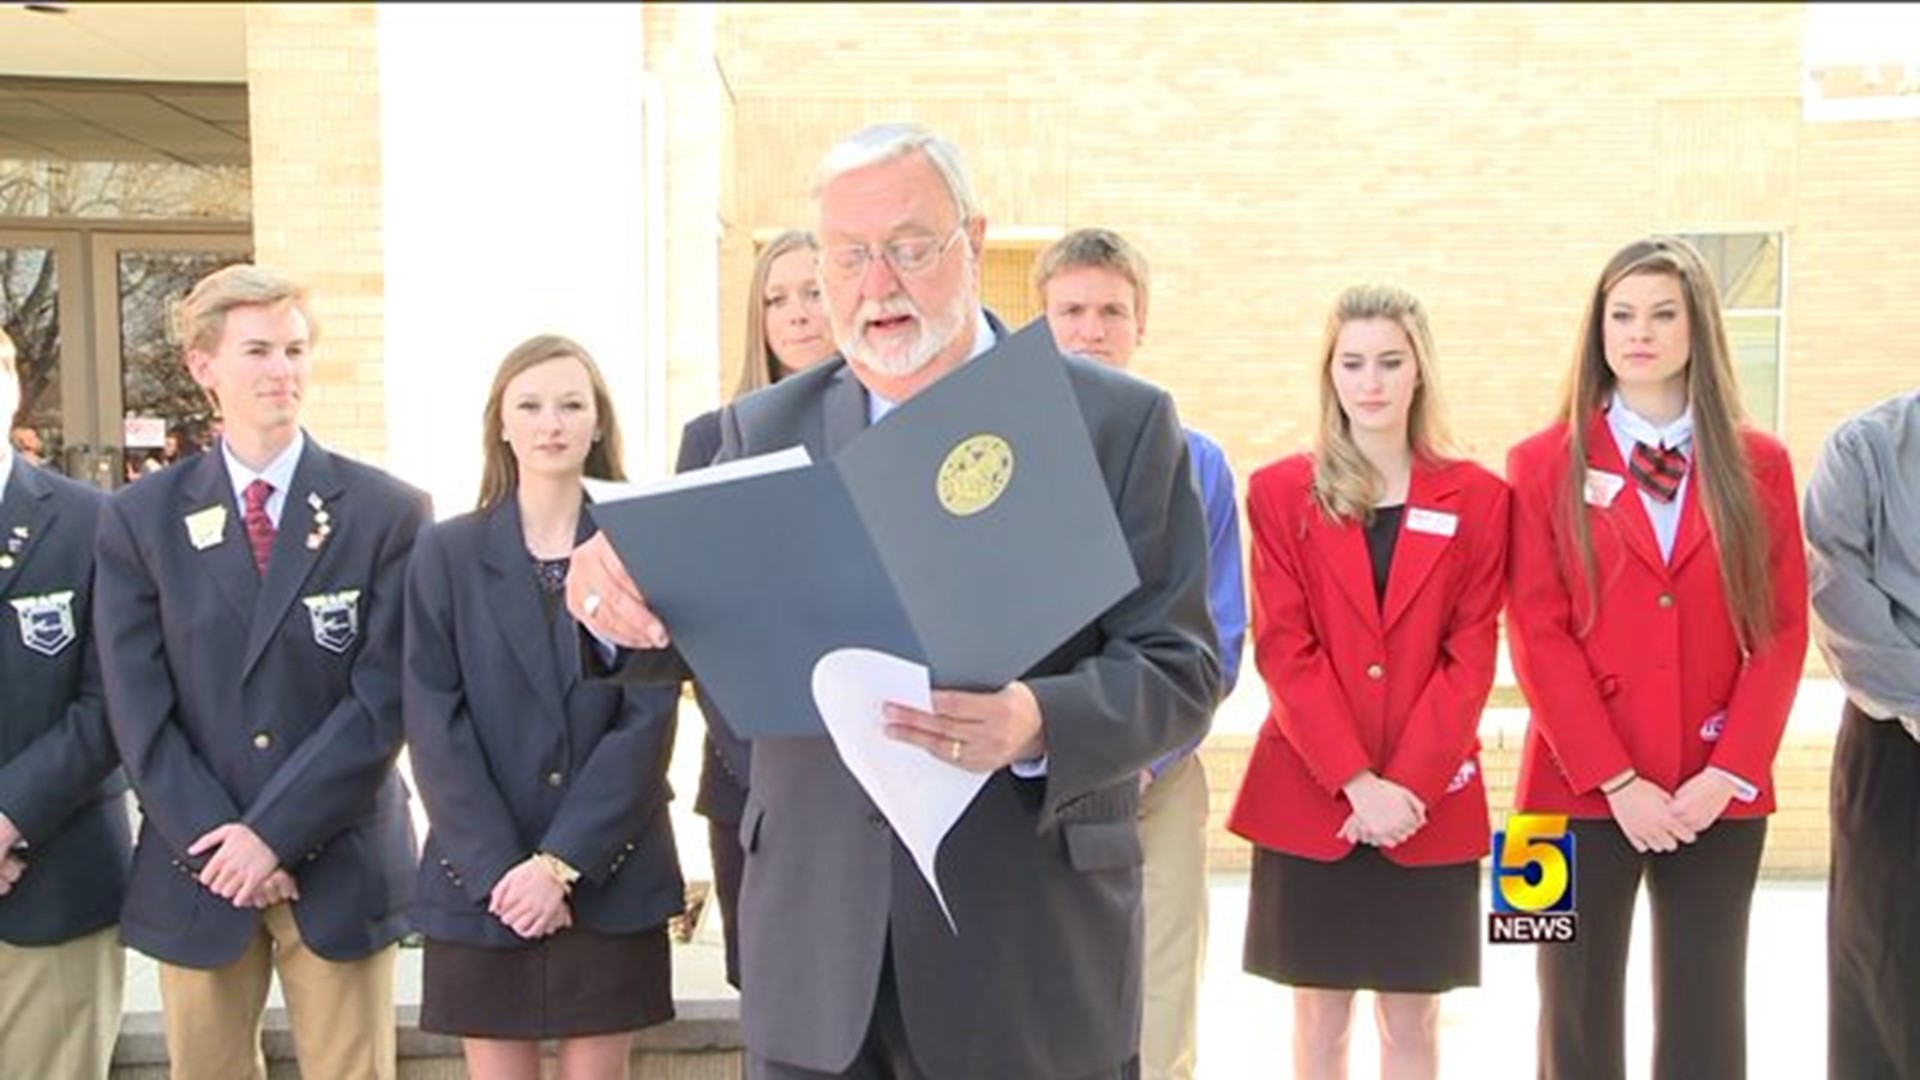 Mayor Recognizes Career and Technical Education Offered At Fort Smith Schools